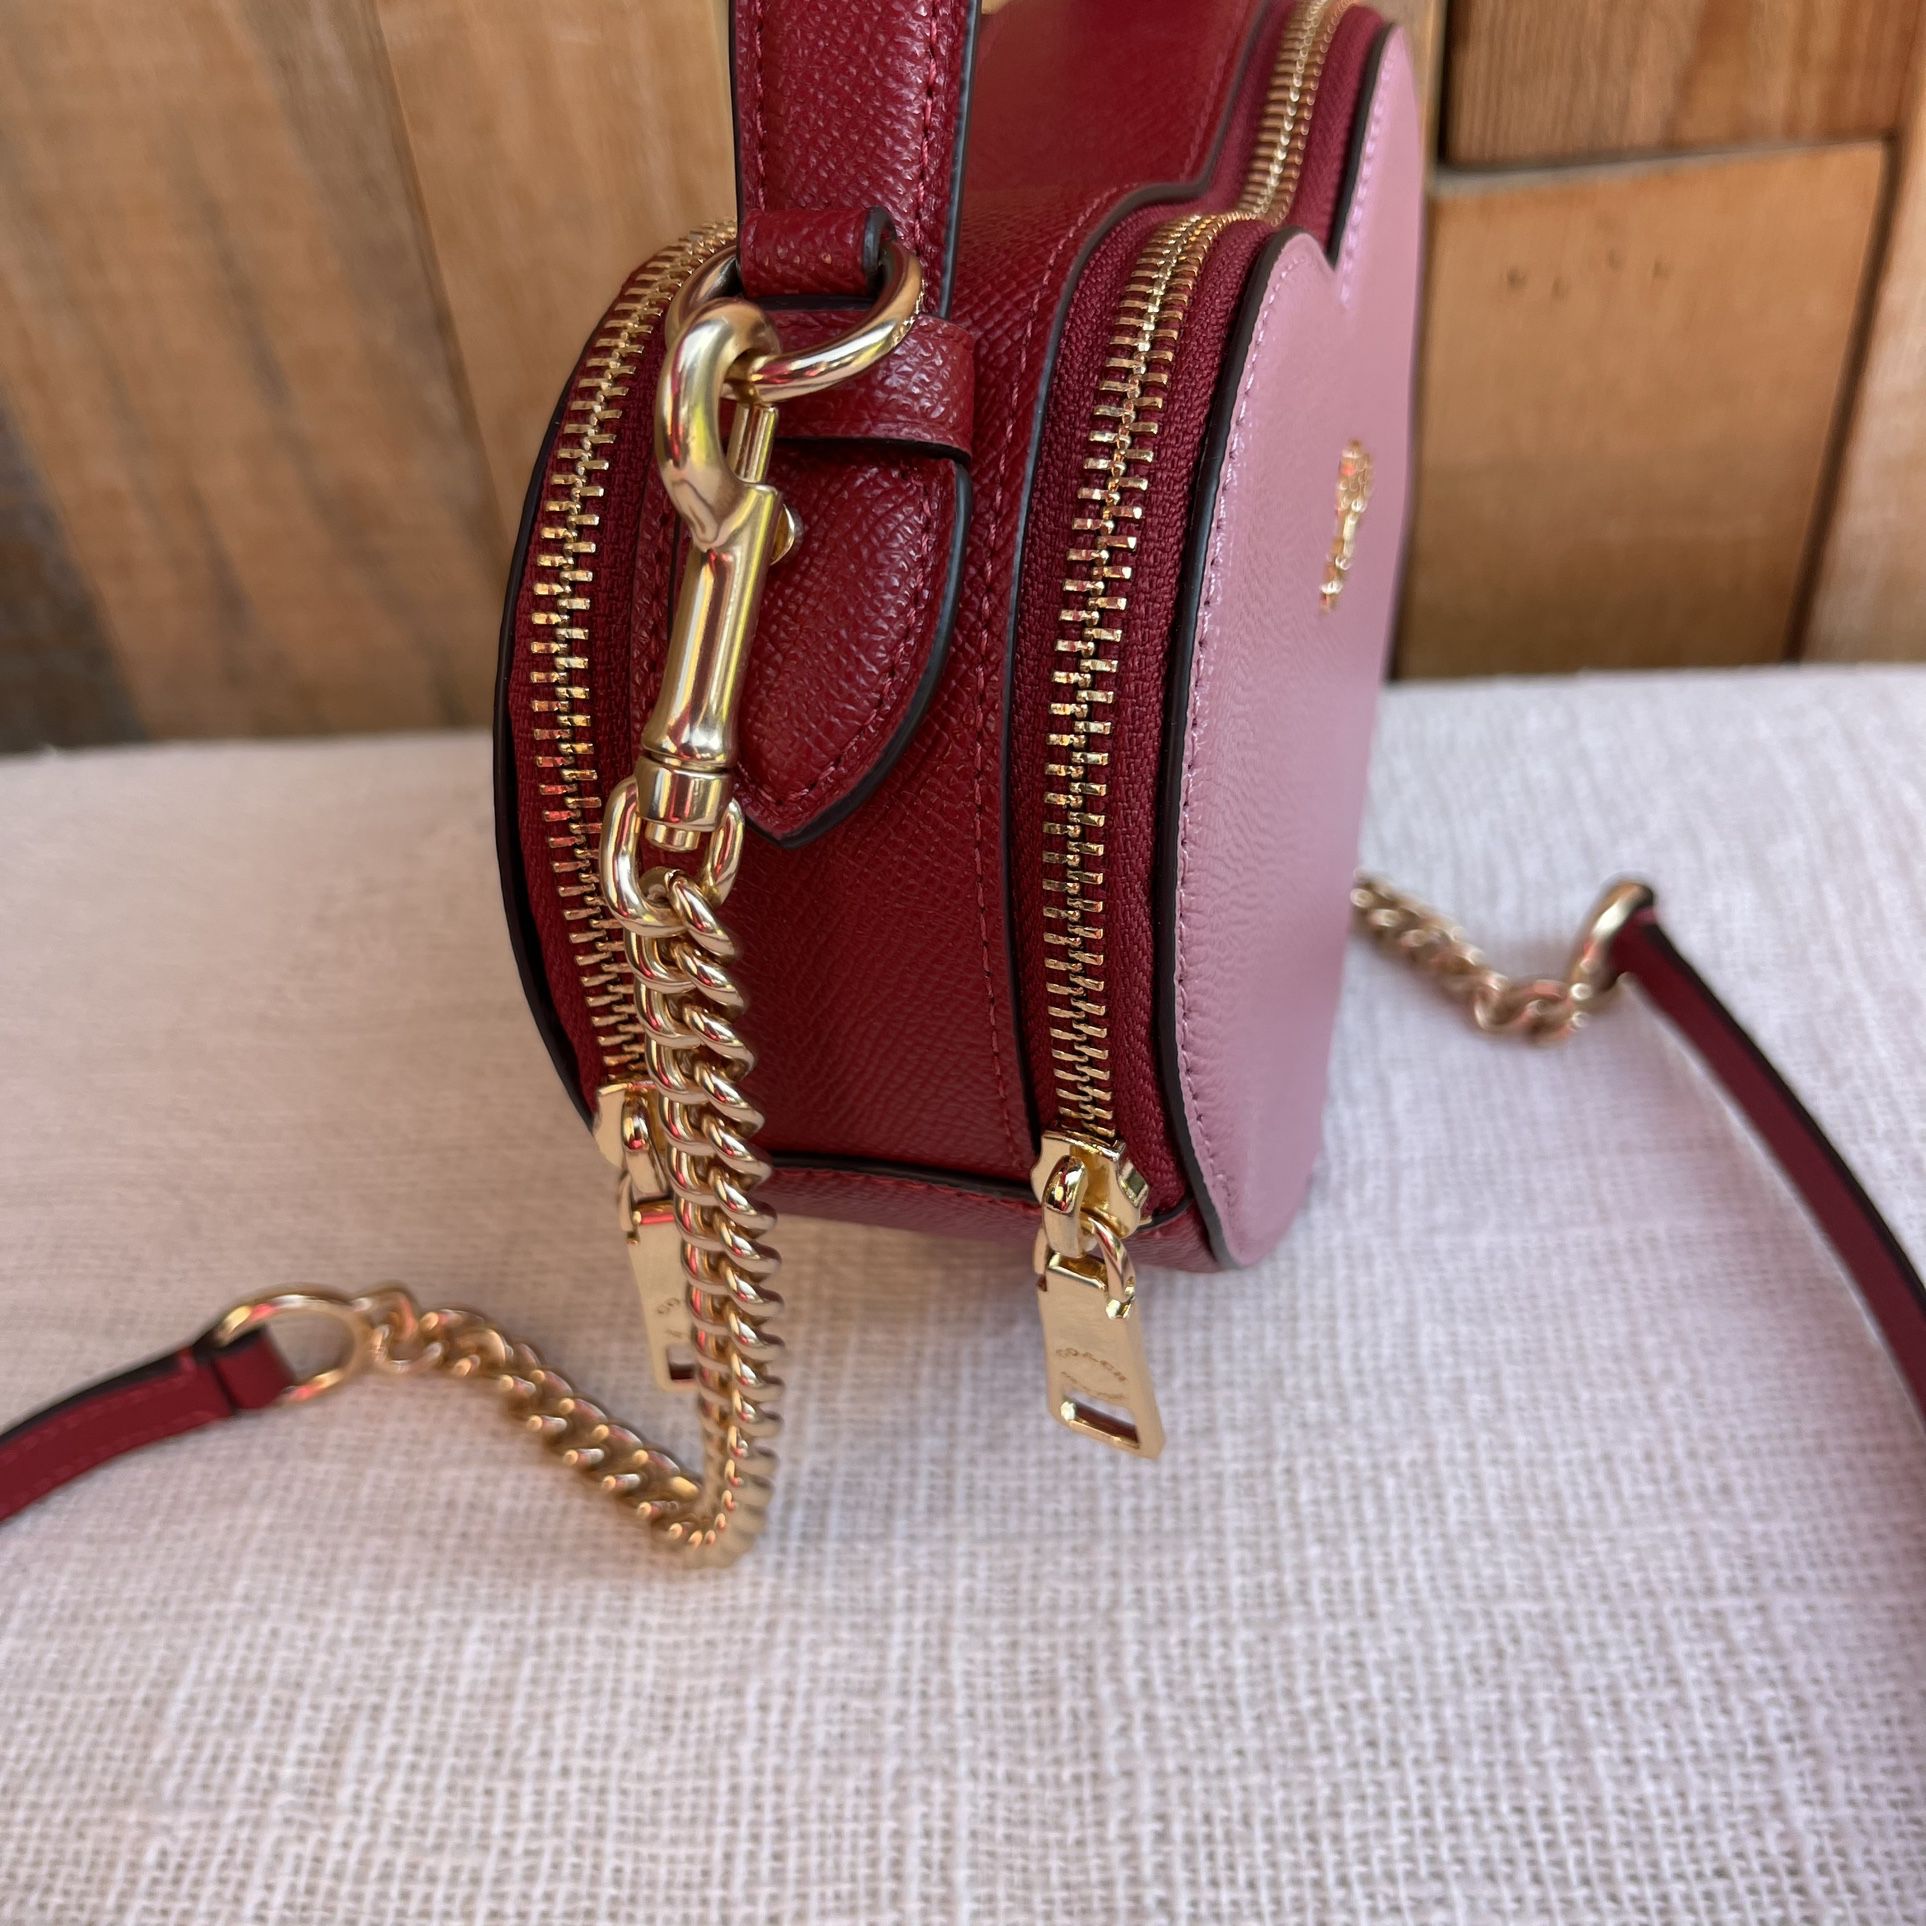 Coach heart bag rerelease: Where to get the heart crossbody on sale with  other favorites 